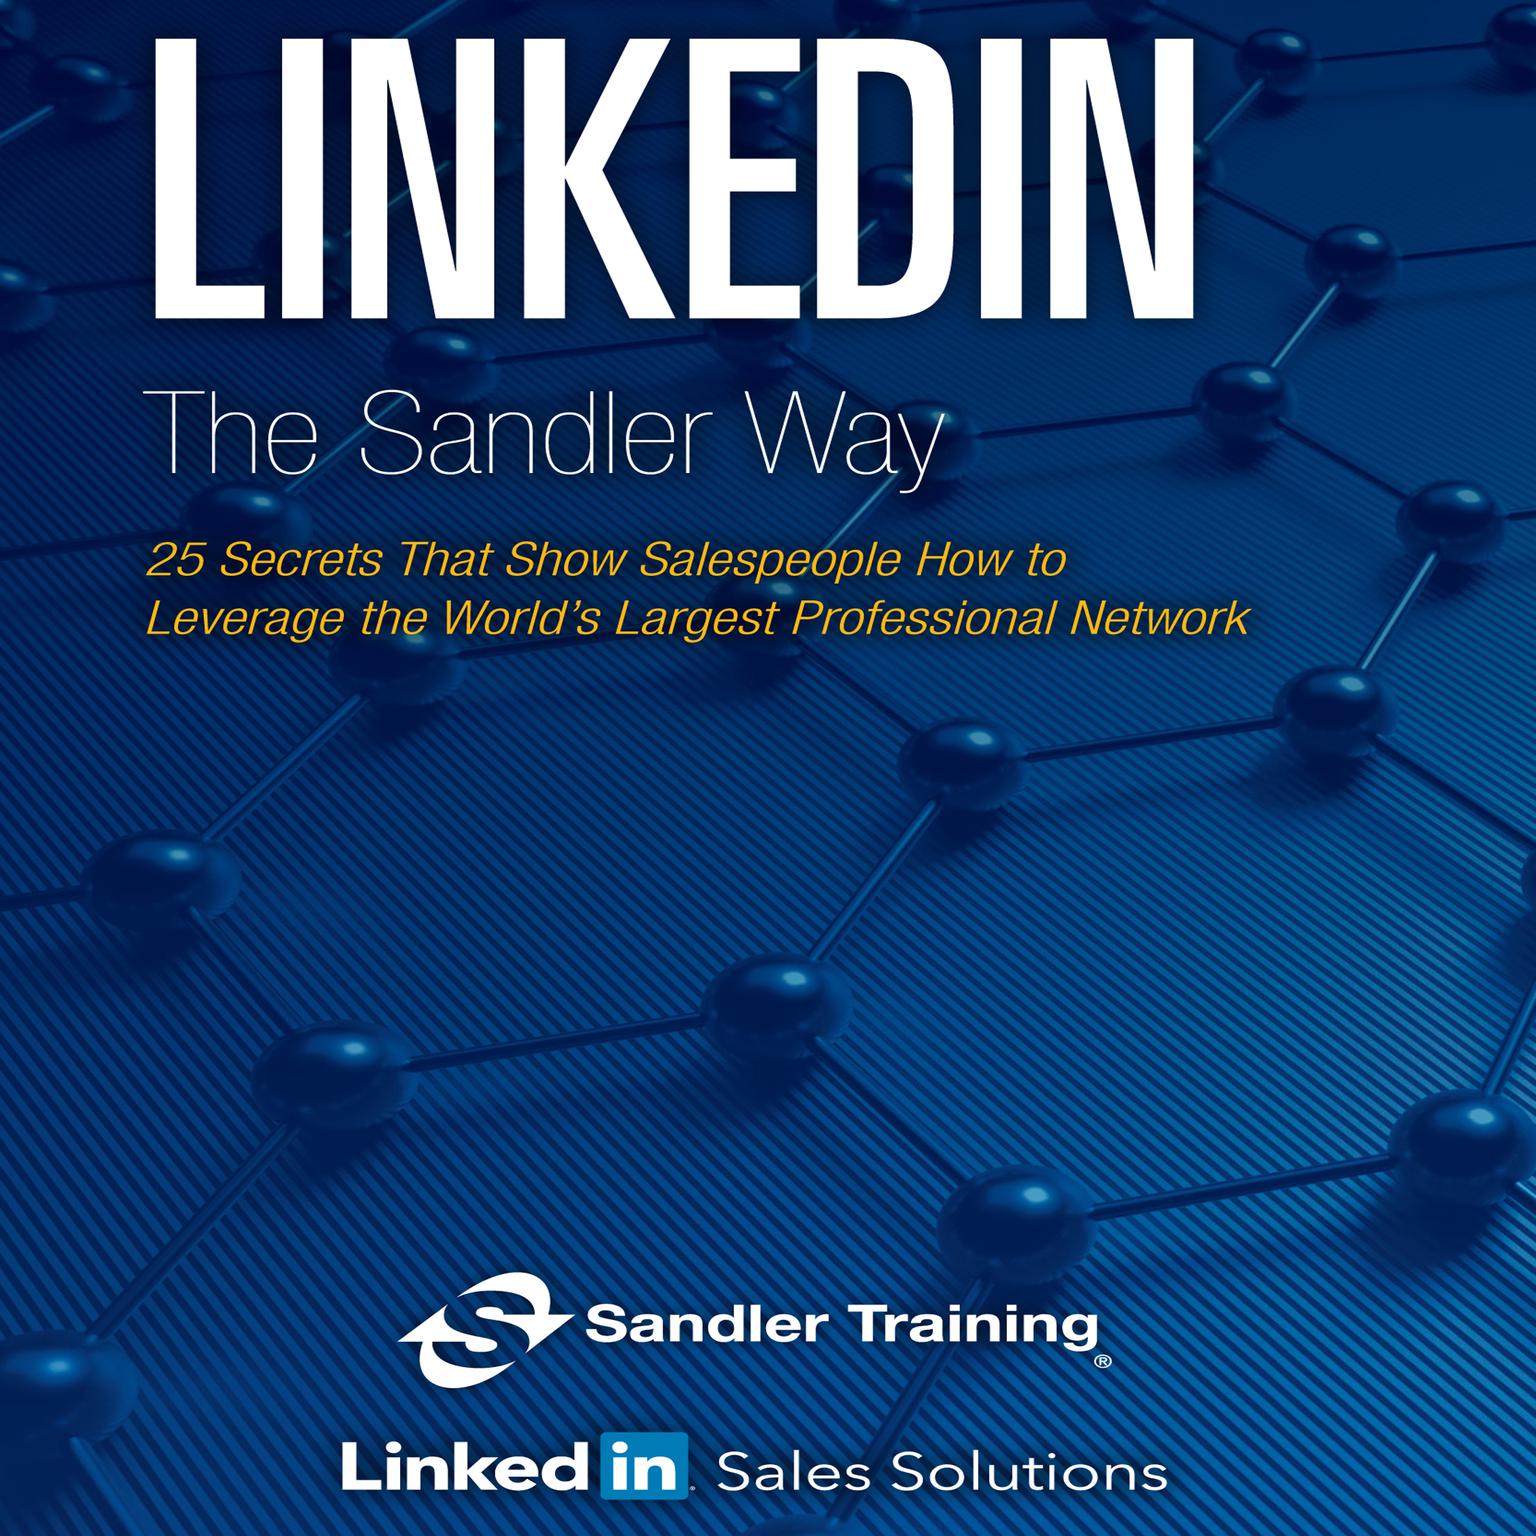 Linkedin the Sandler Way: 25 Secrets That Show Salespeople How to Leverage the World’s Largest Professional Network Audiobook, by Sandler Systems Inc.